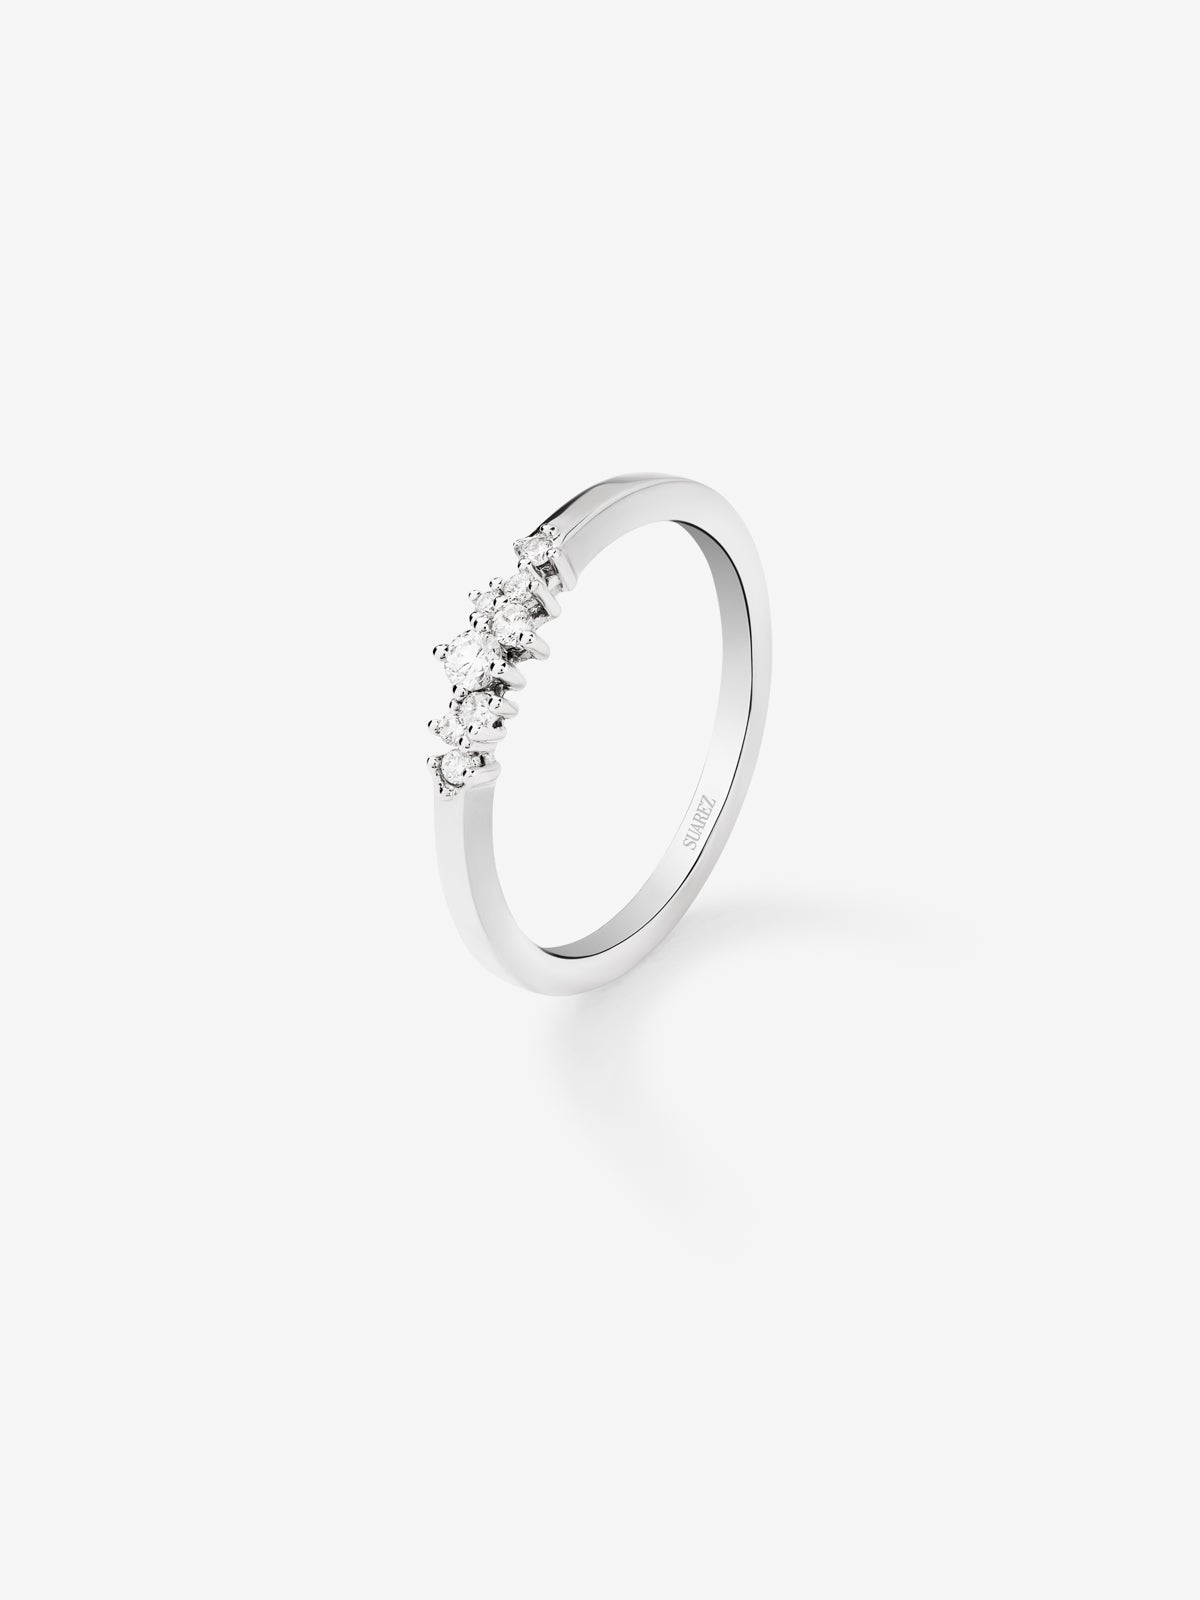 18K white gold ring with 8 brilliant-cut diamonds with a total of 0.1 cts